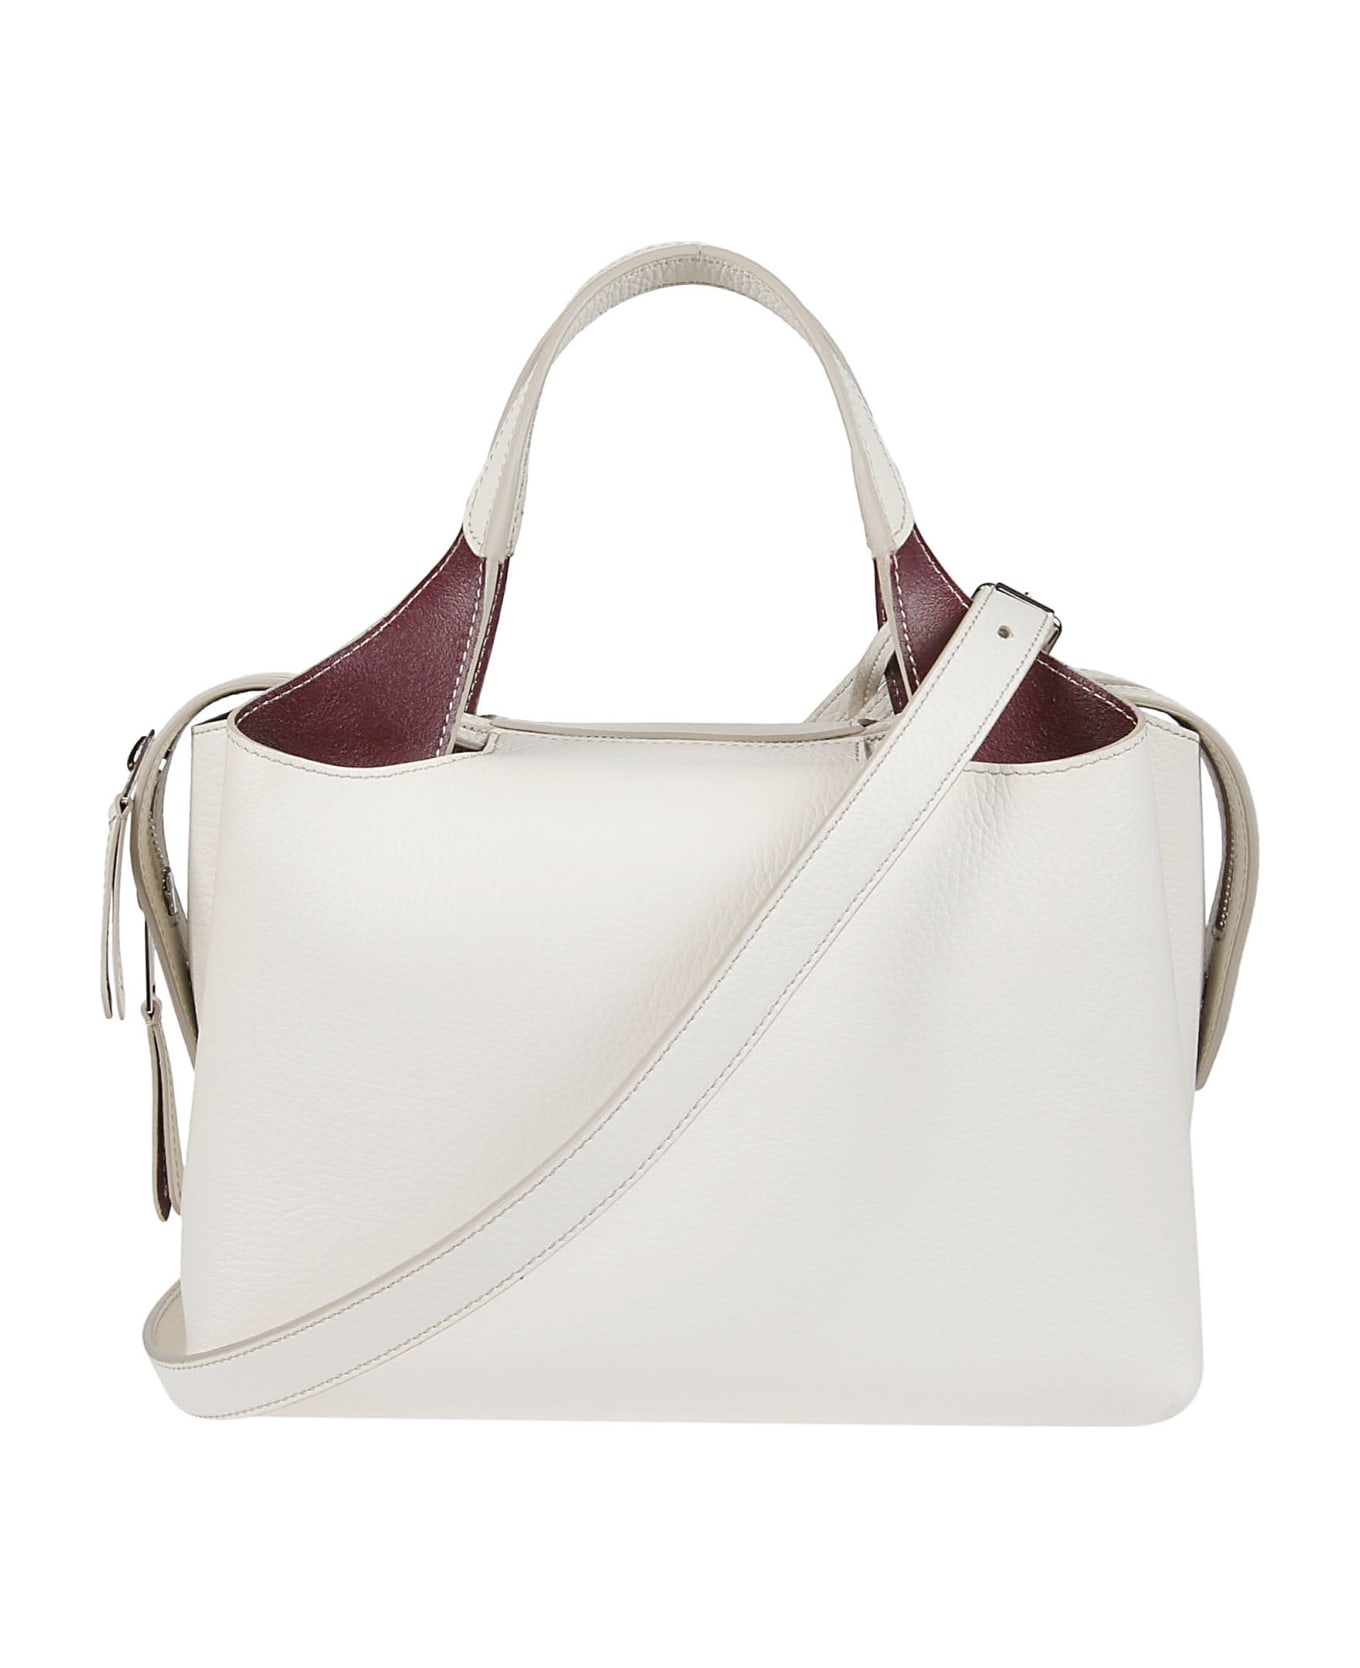 Tod's Top Zipped Dual Handle Tote - Bianco Calce/bordeaux Scuro トートバッグ